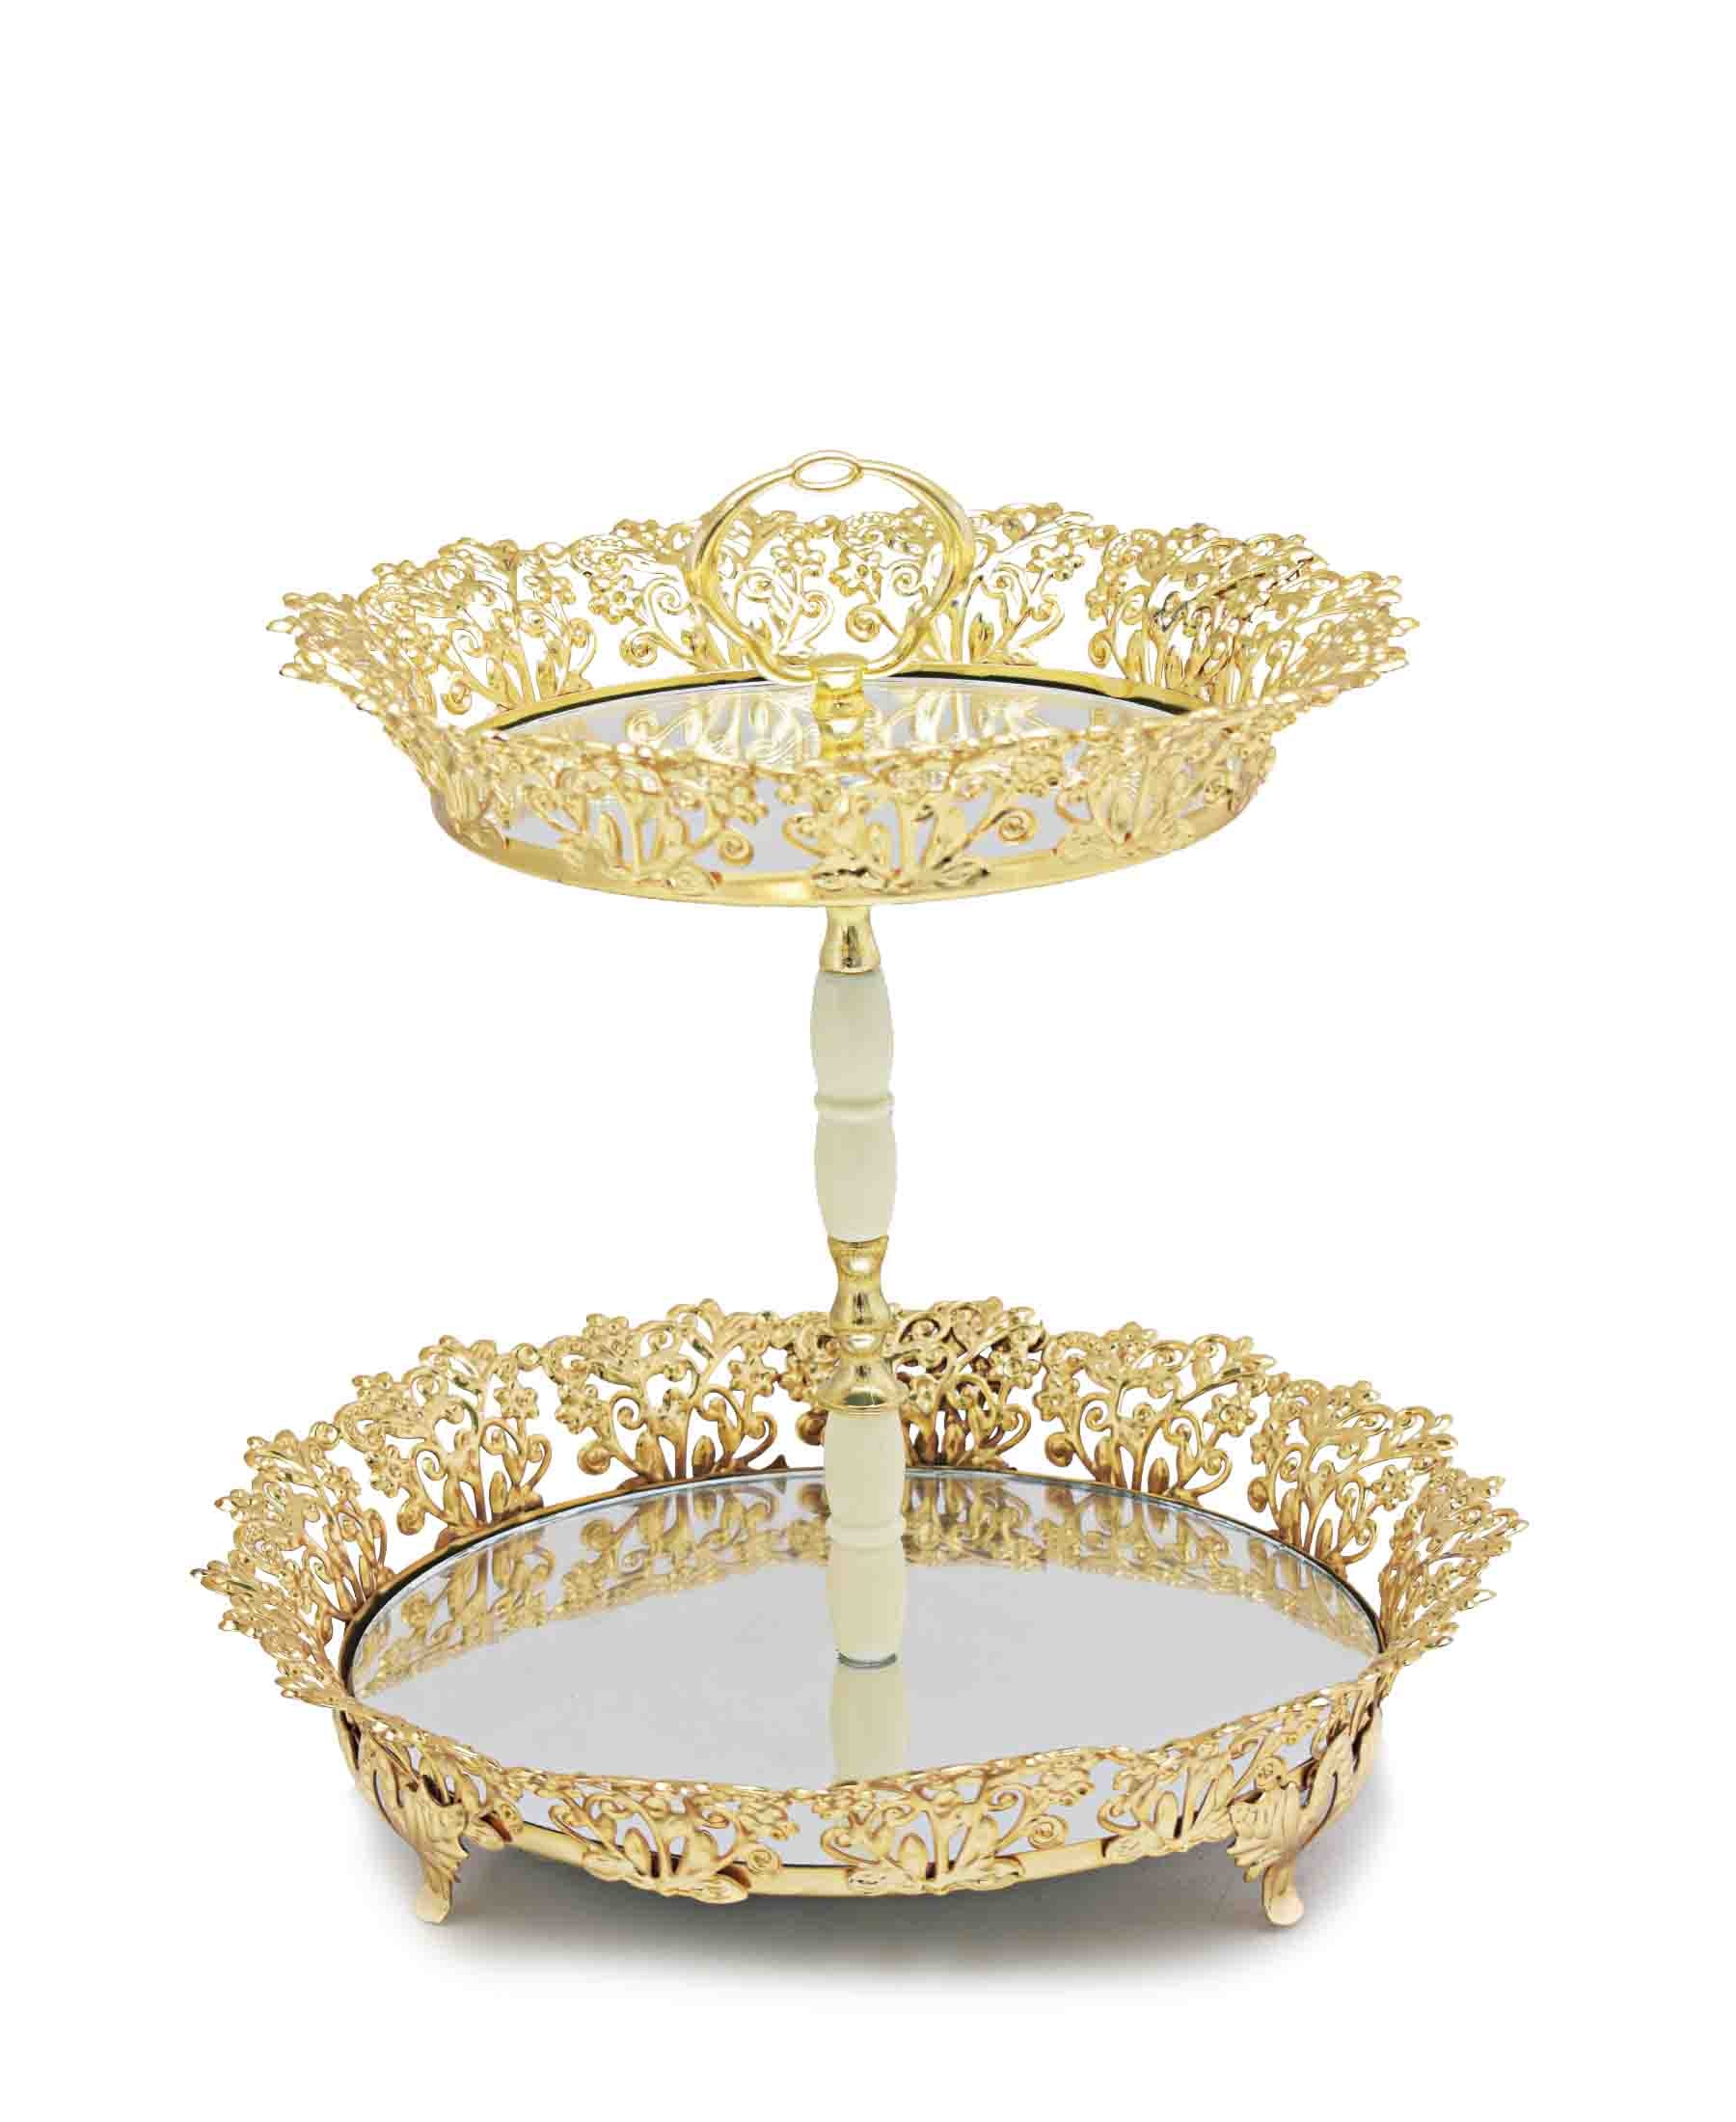 Bursa Collection Two Layer Yelpaze Stand - Gold